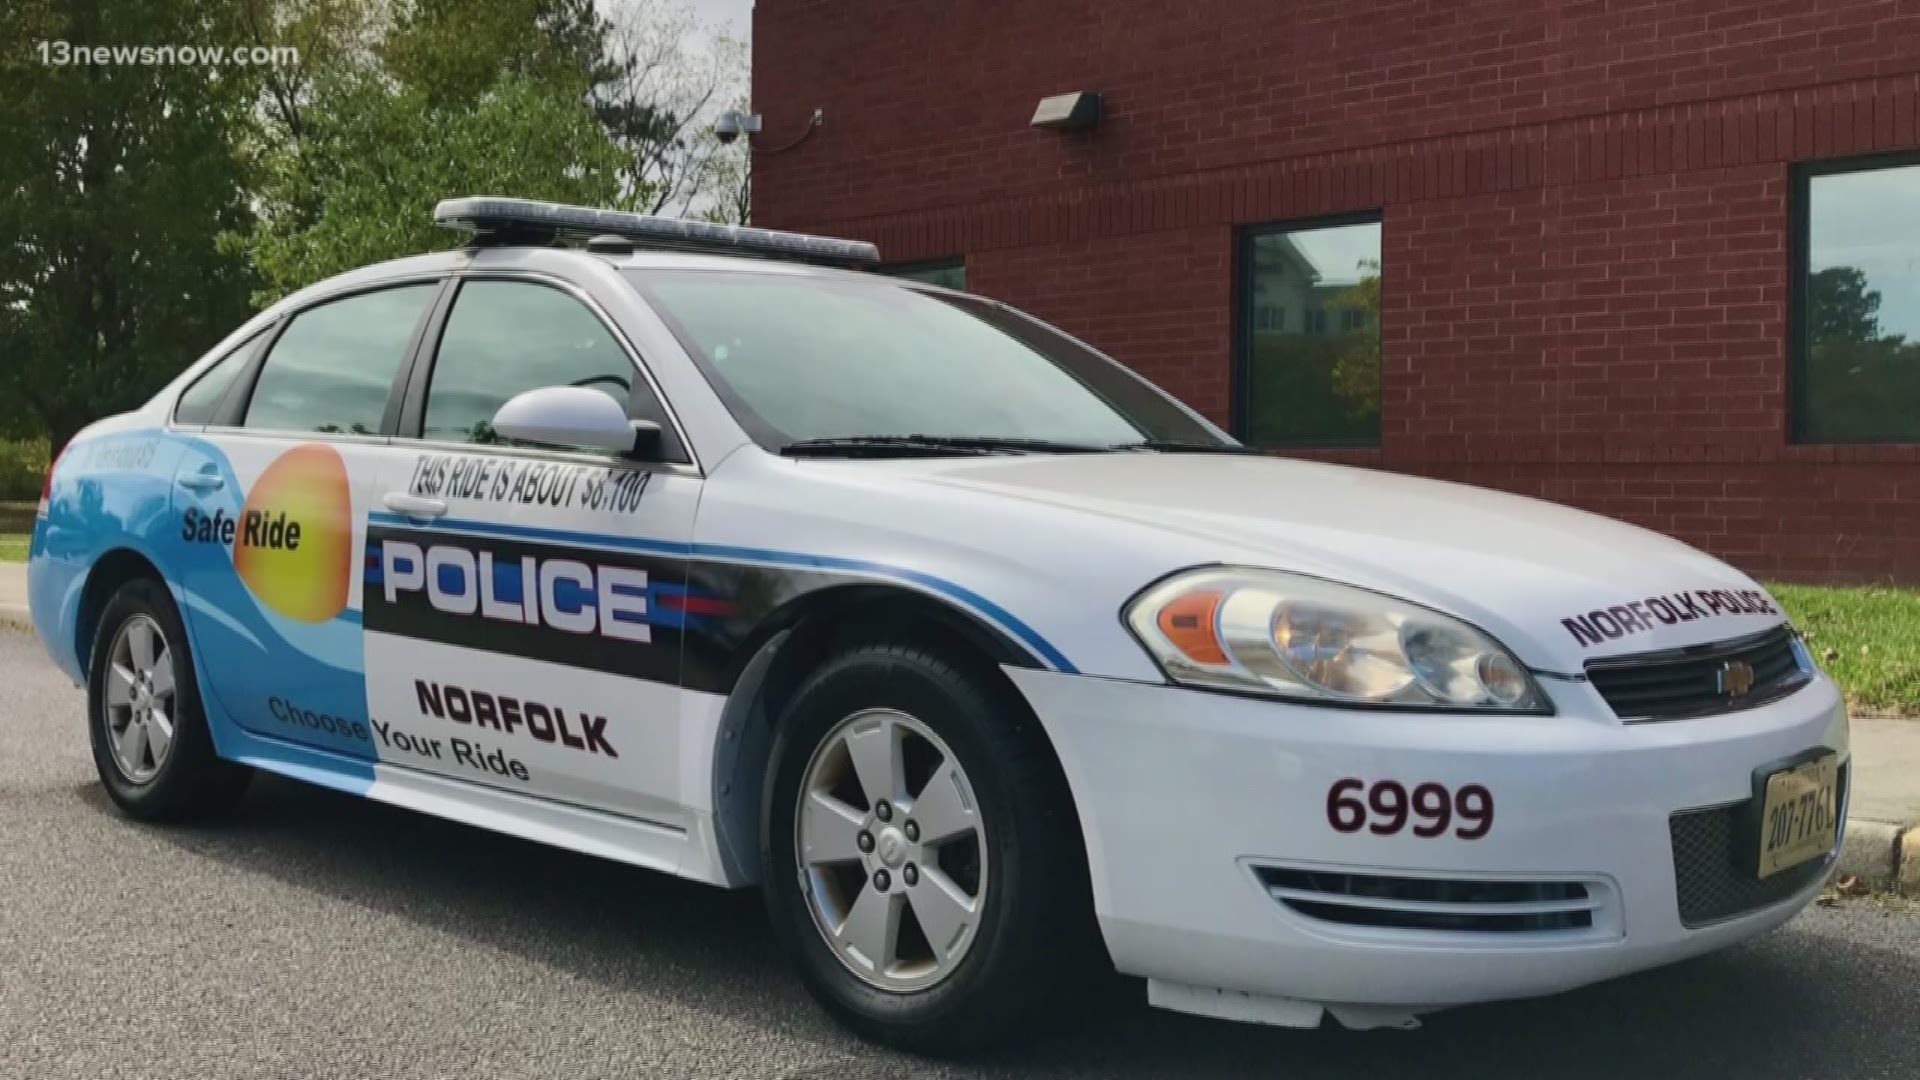 The police taxi is a rolling billboard for a 'Don't Drink and Drive' campaign. It was donated by Coastal Taxi. It won't operate as a police cruiser or a taxi.